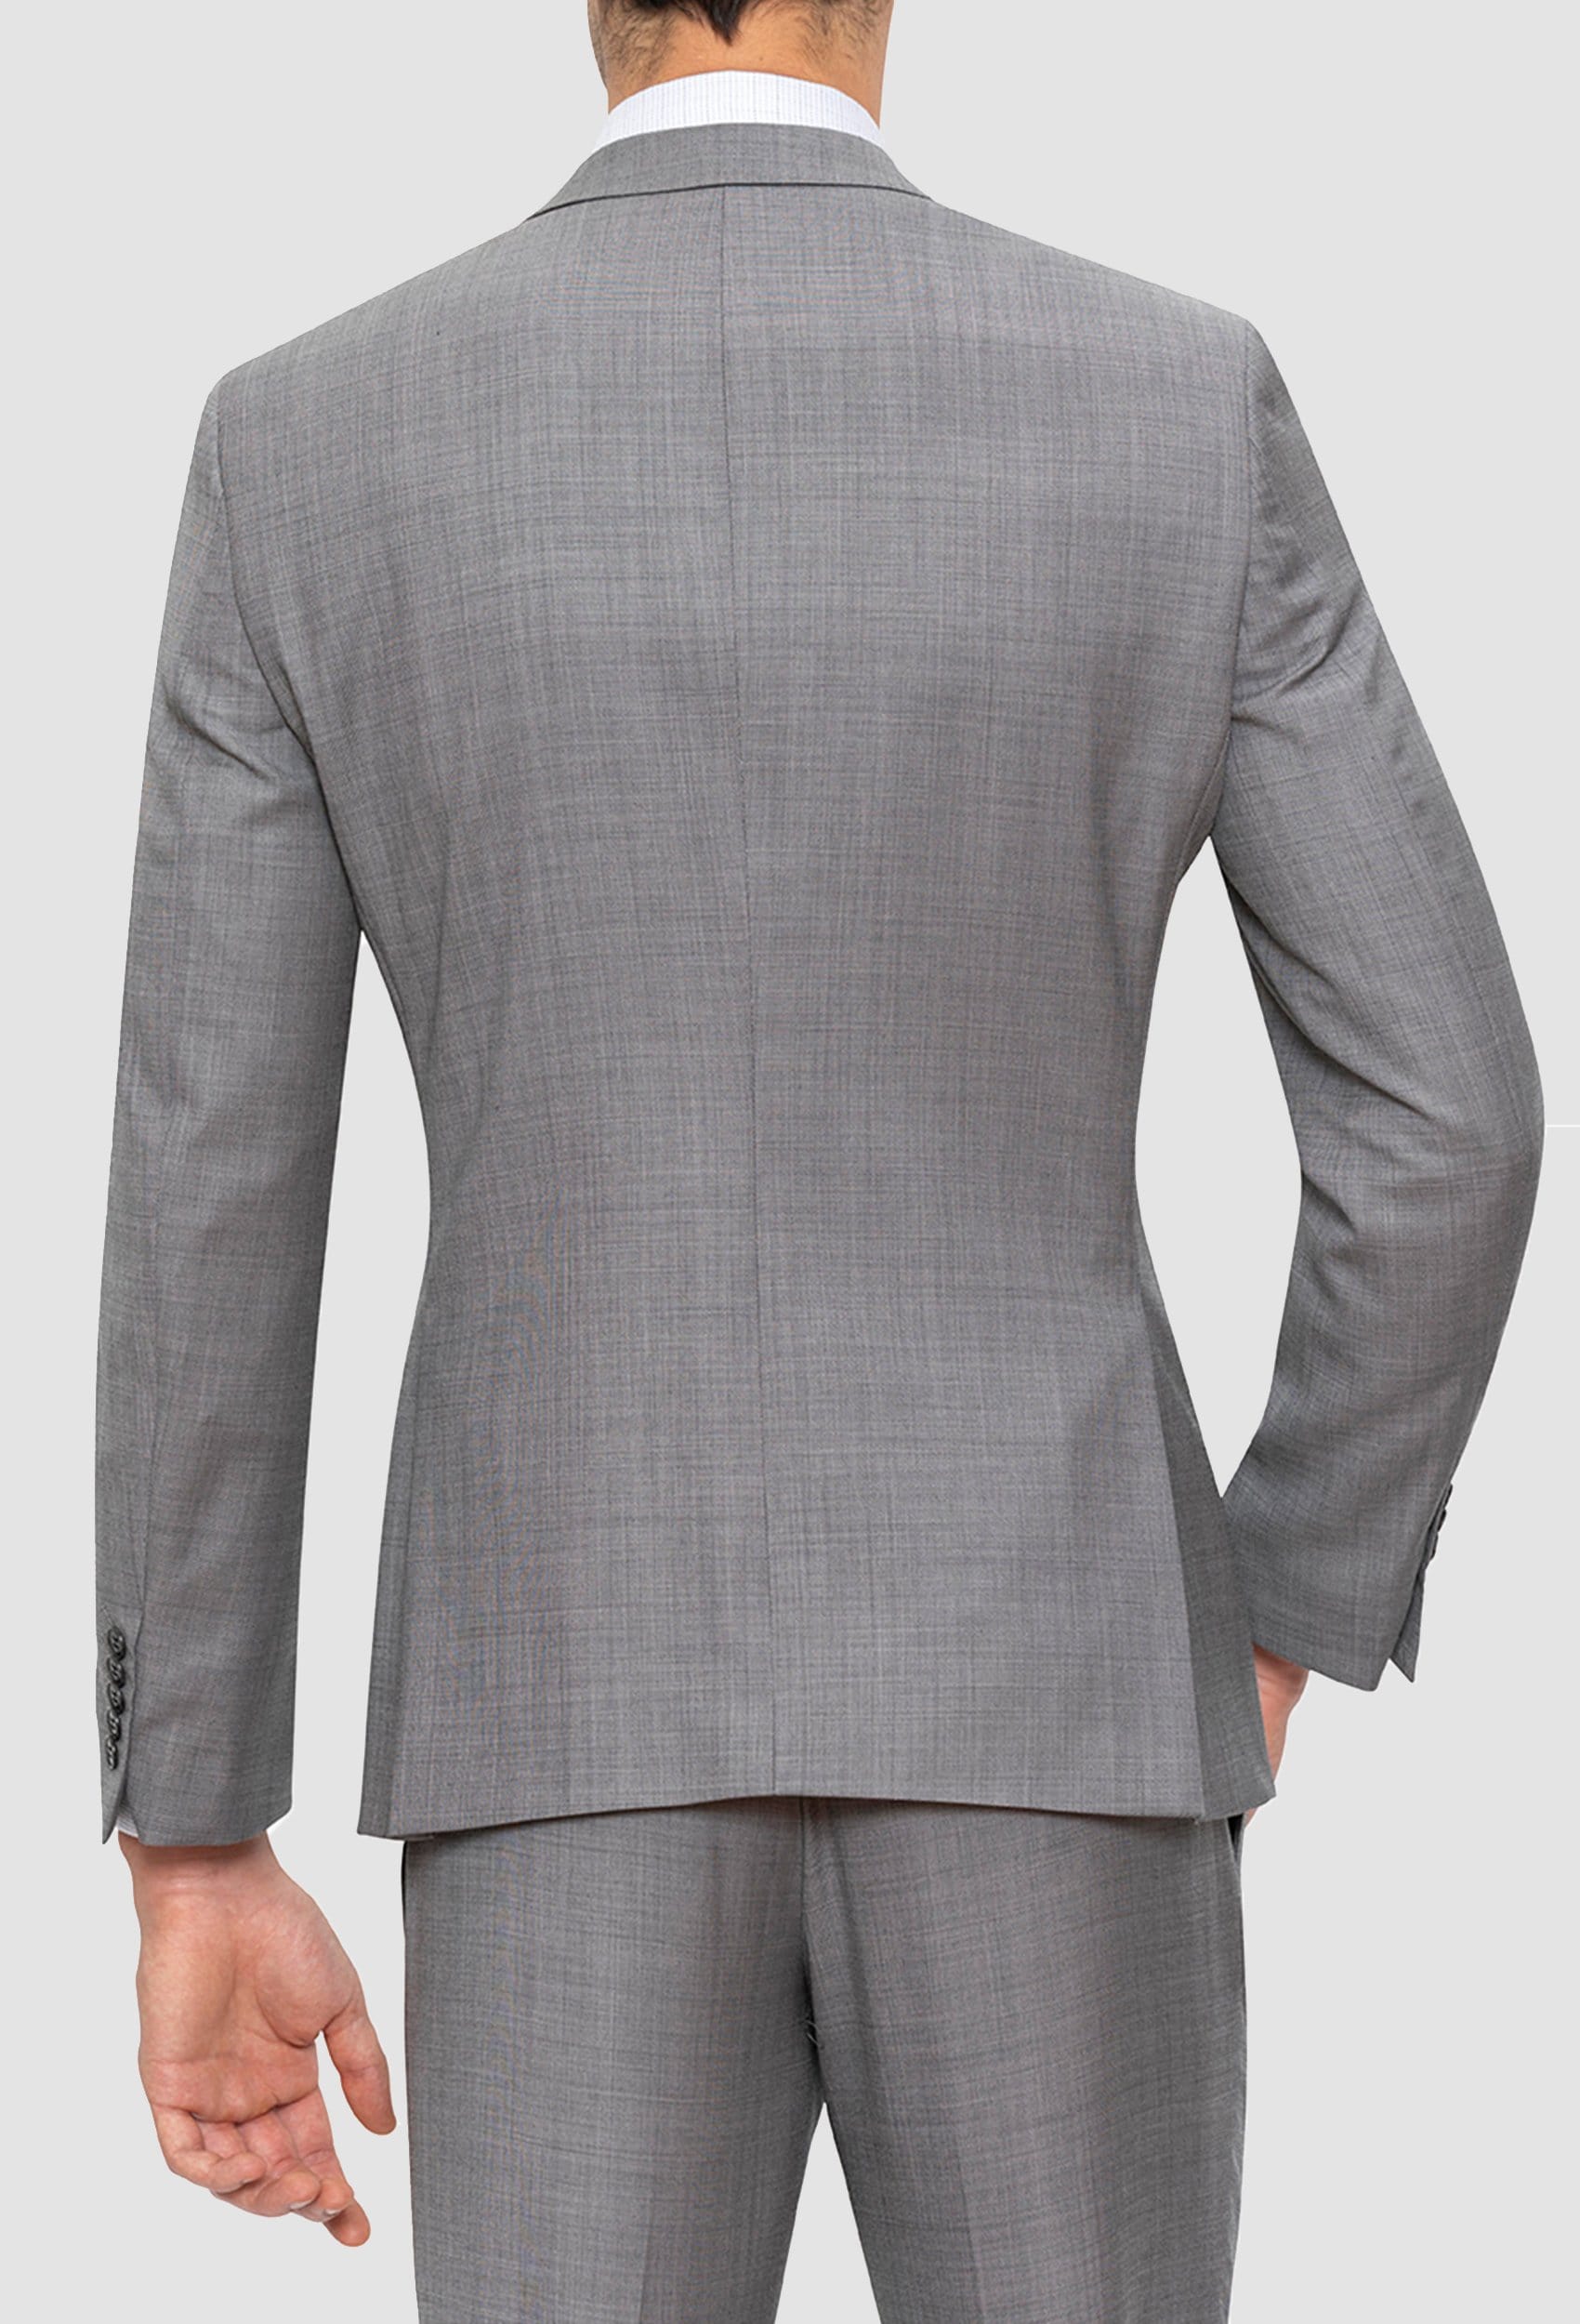 Gibson slim fit lithium suit in grey pure wool – Mens Suit Warehouse ...